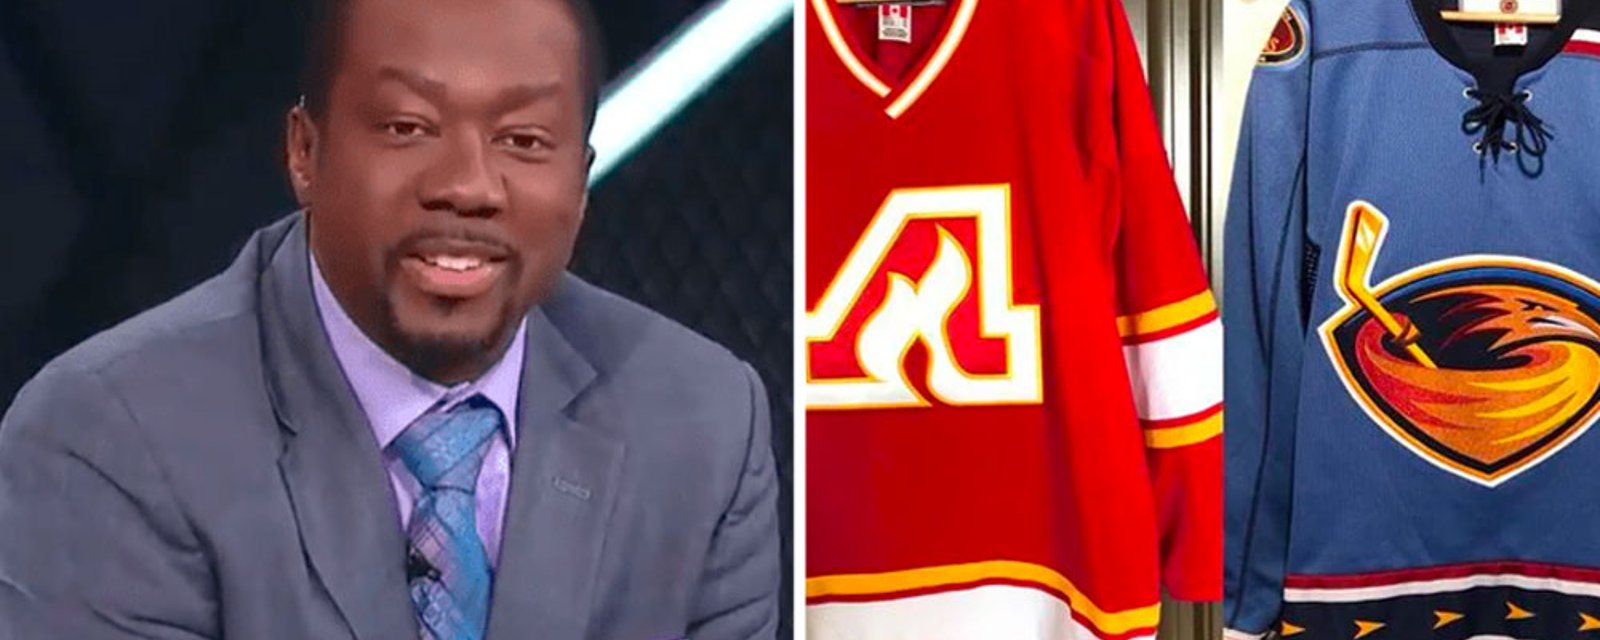 Reports that former NHLer Anson Carter is trying to bring the NHL back to Atlanta